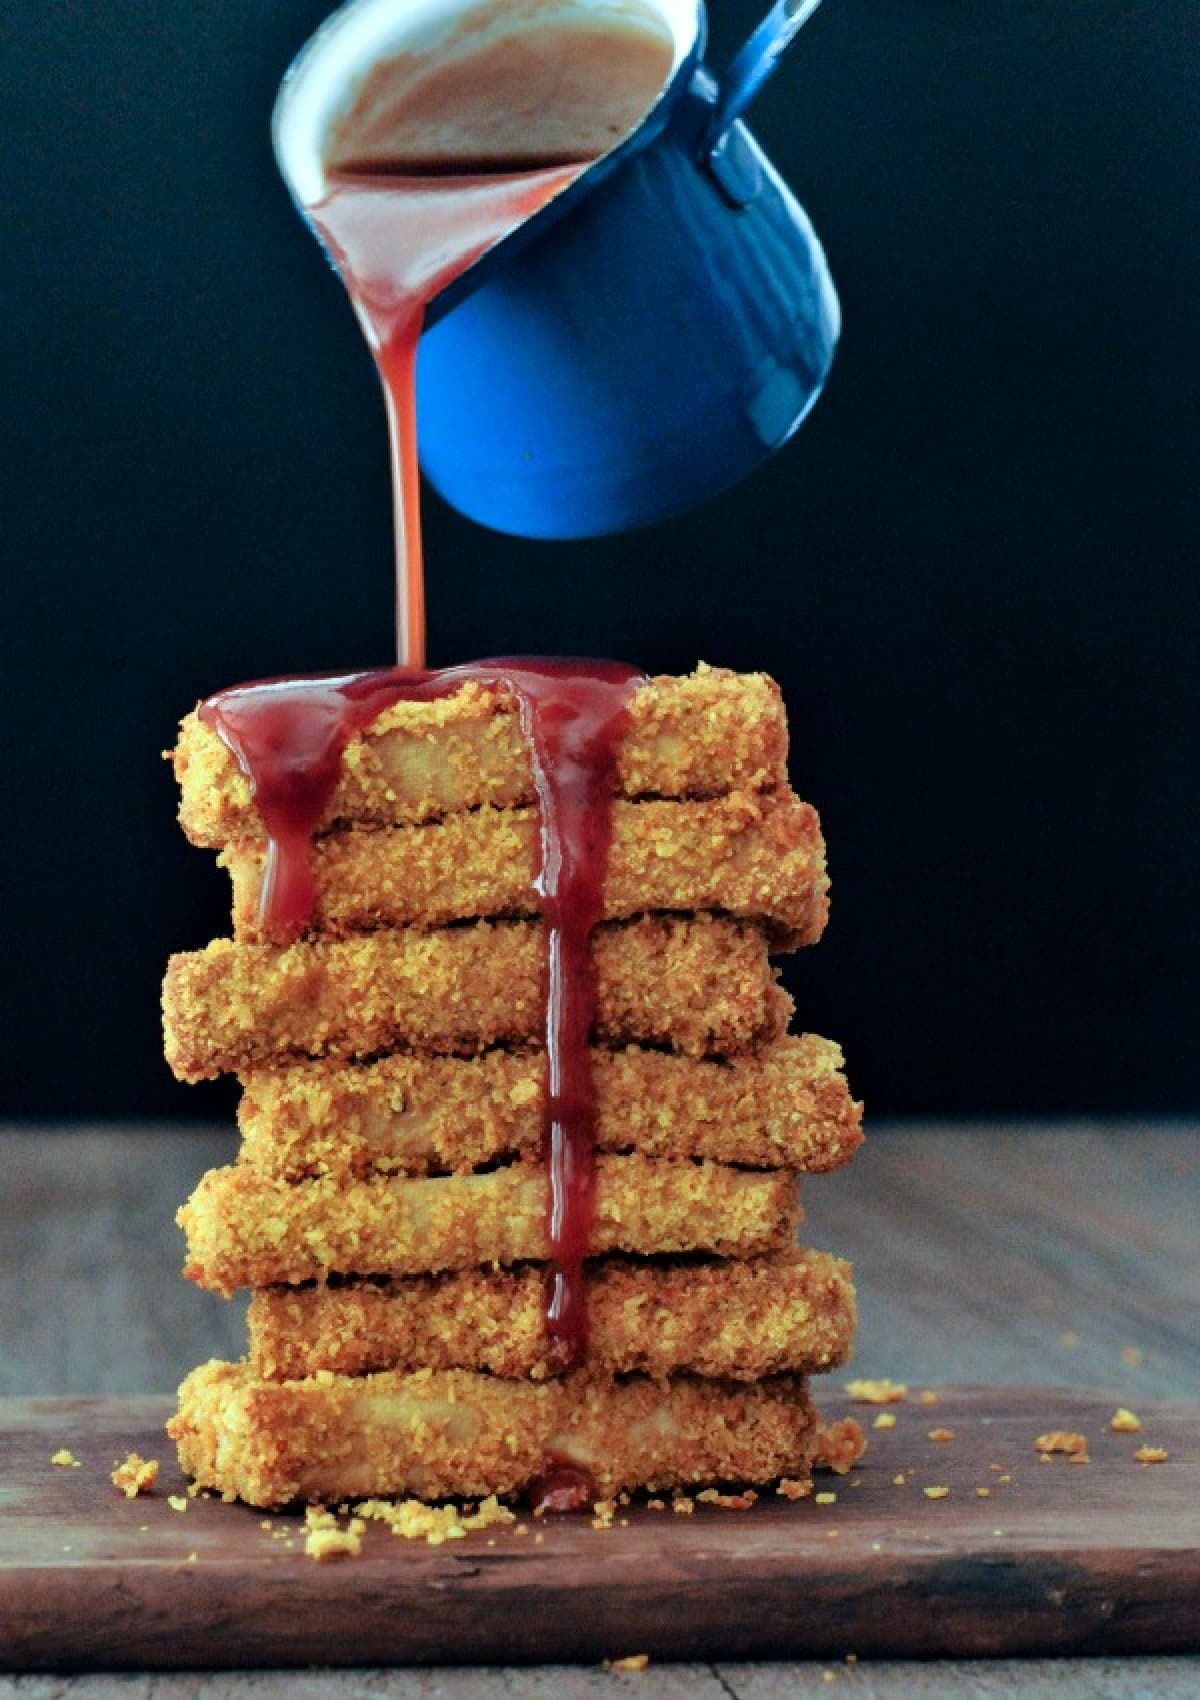 A stack of crispy fried tofu on a dark wood cutting board against a black background, with a blue sauce ladle pouring BBQ sauce over top.